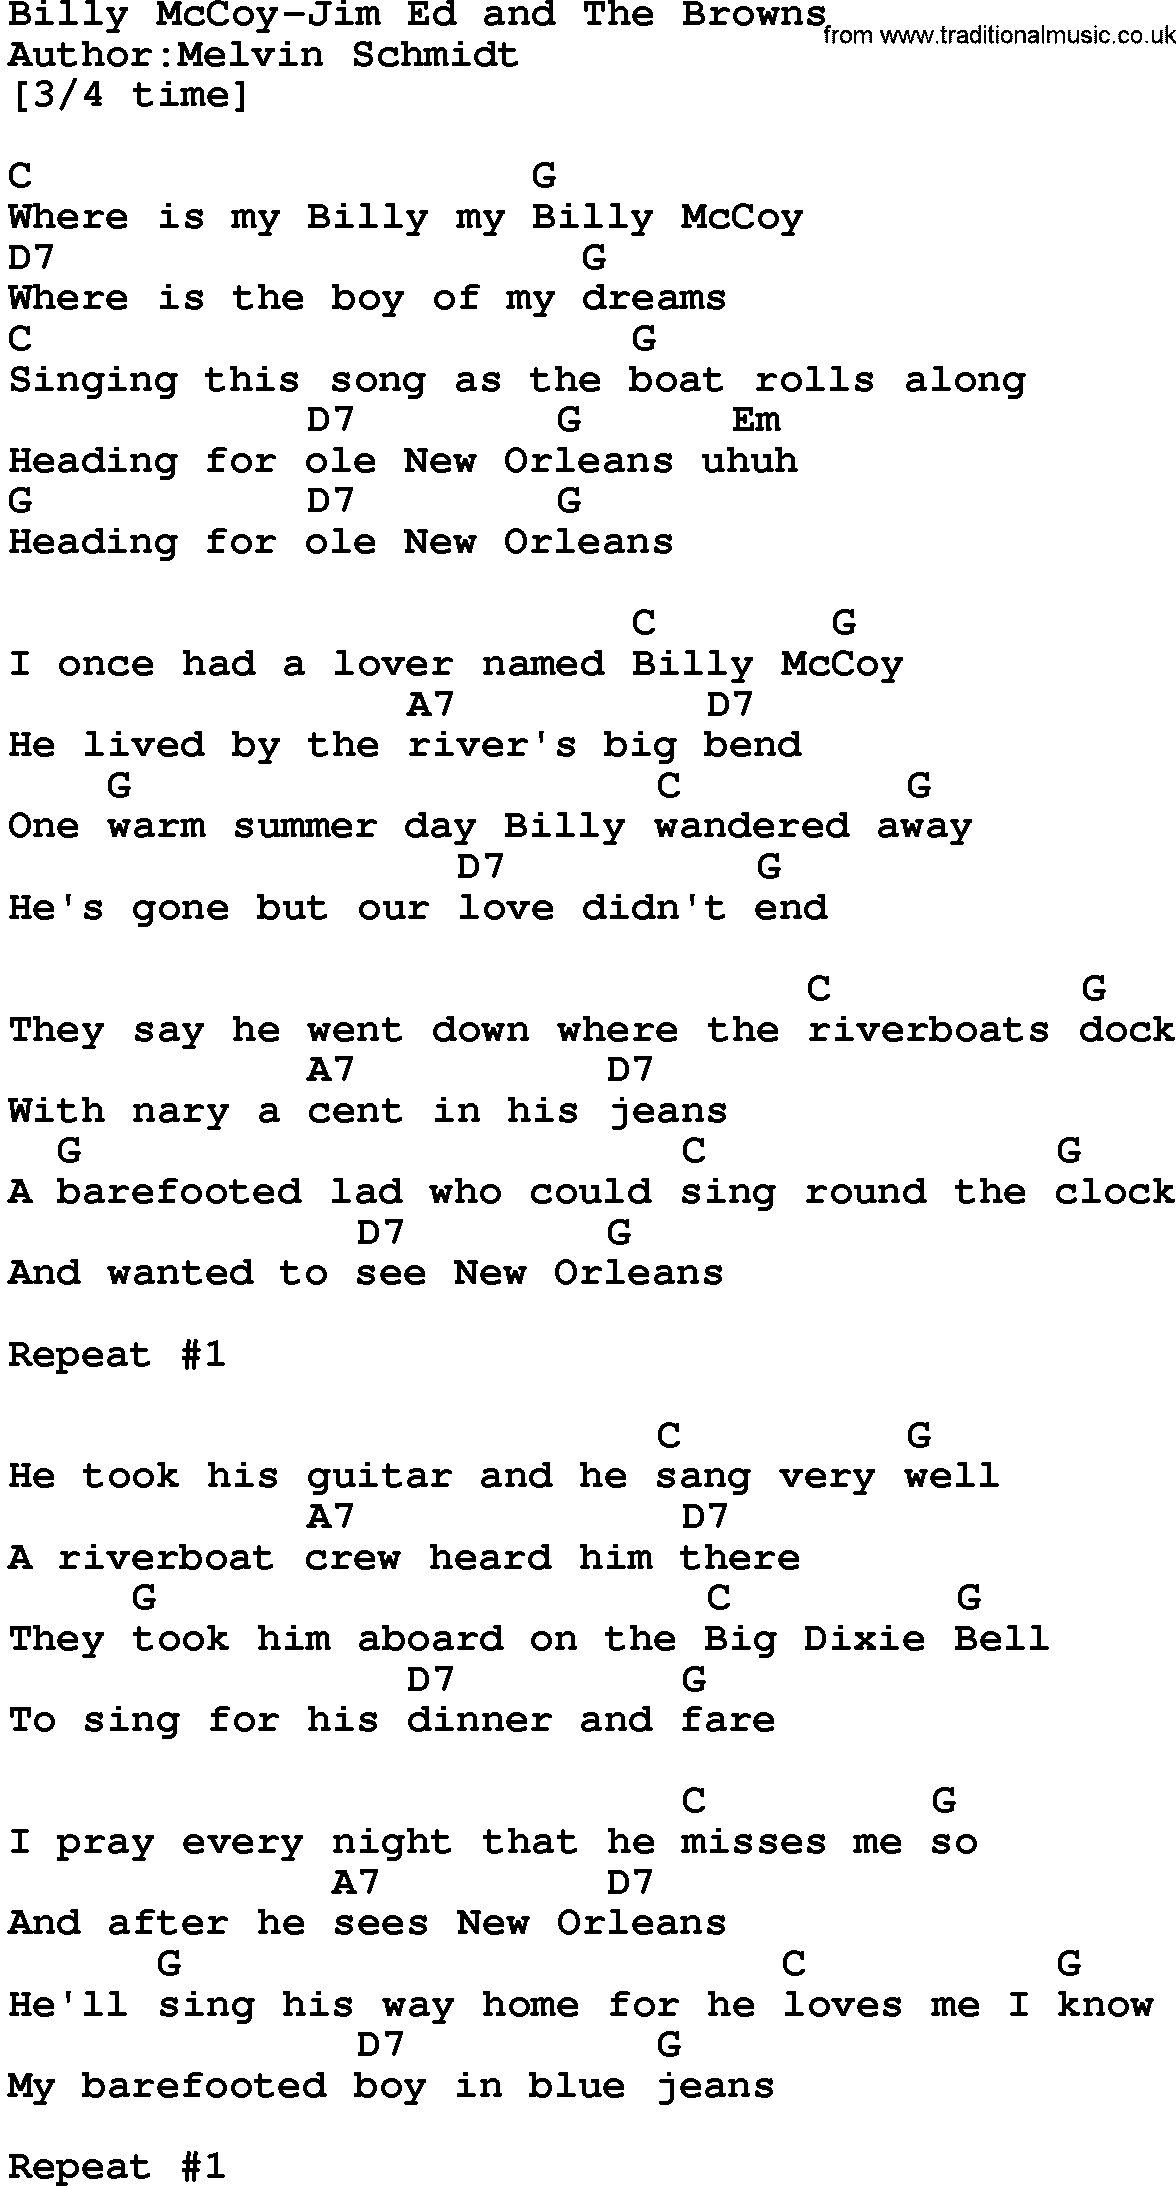 Country music song: Billy Mccoy-Jim Ed And The Browns lyrics and chords